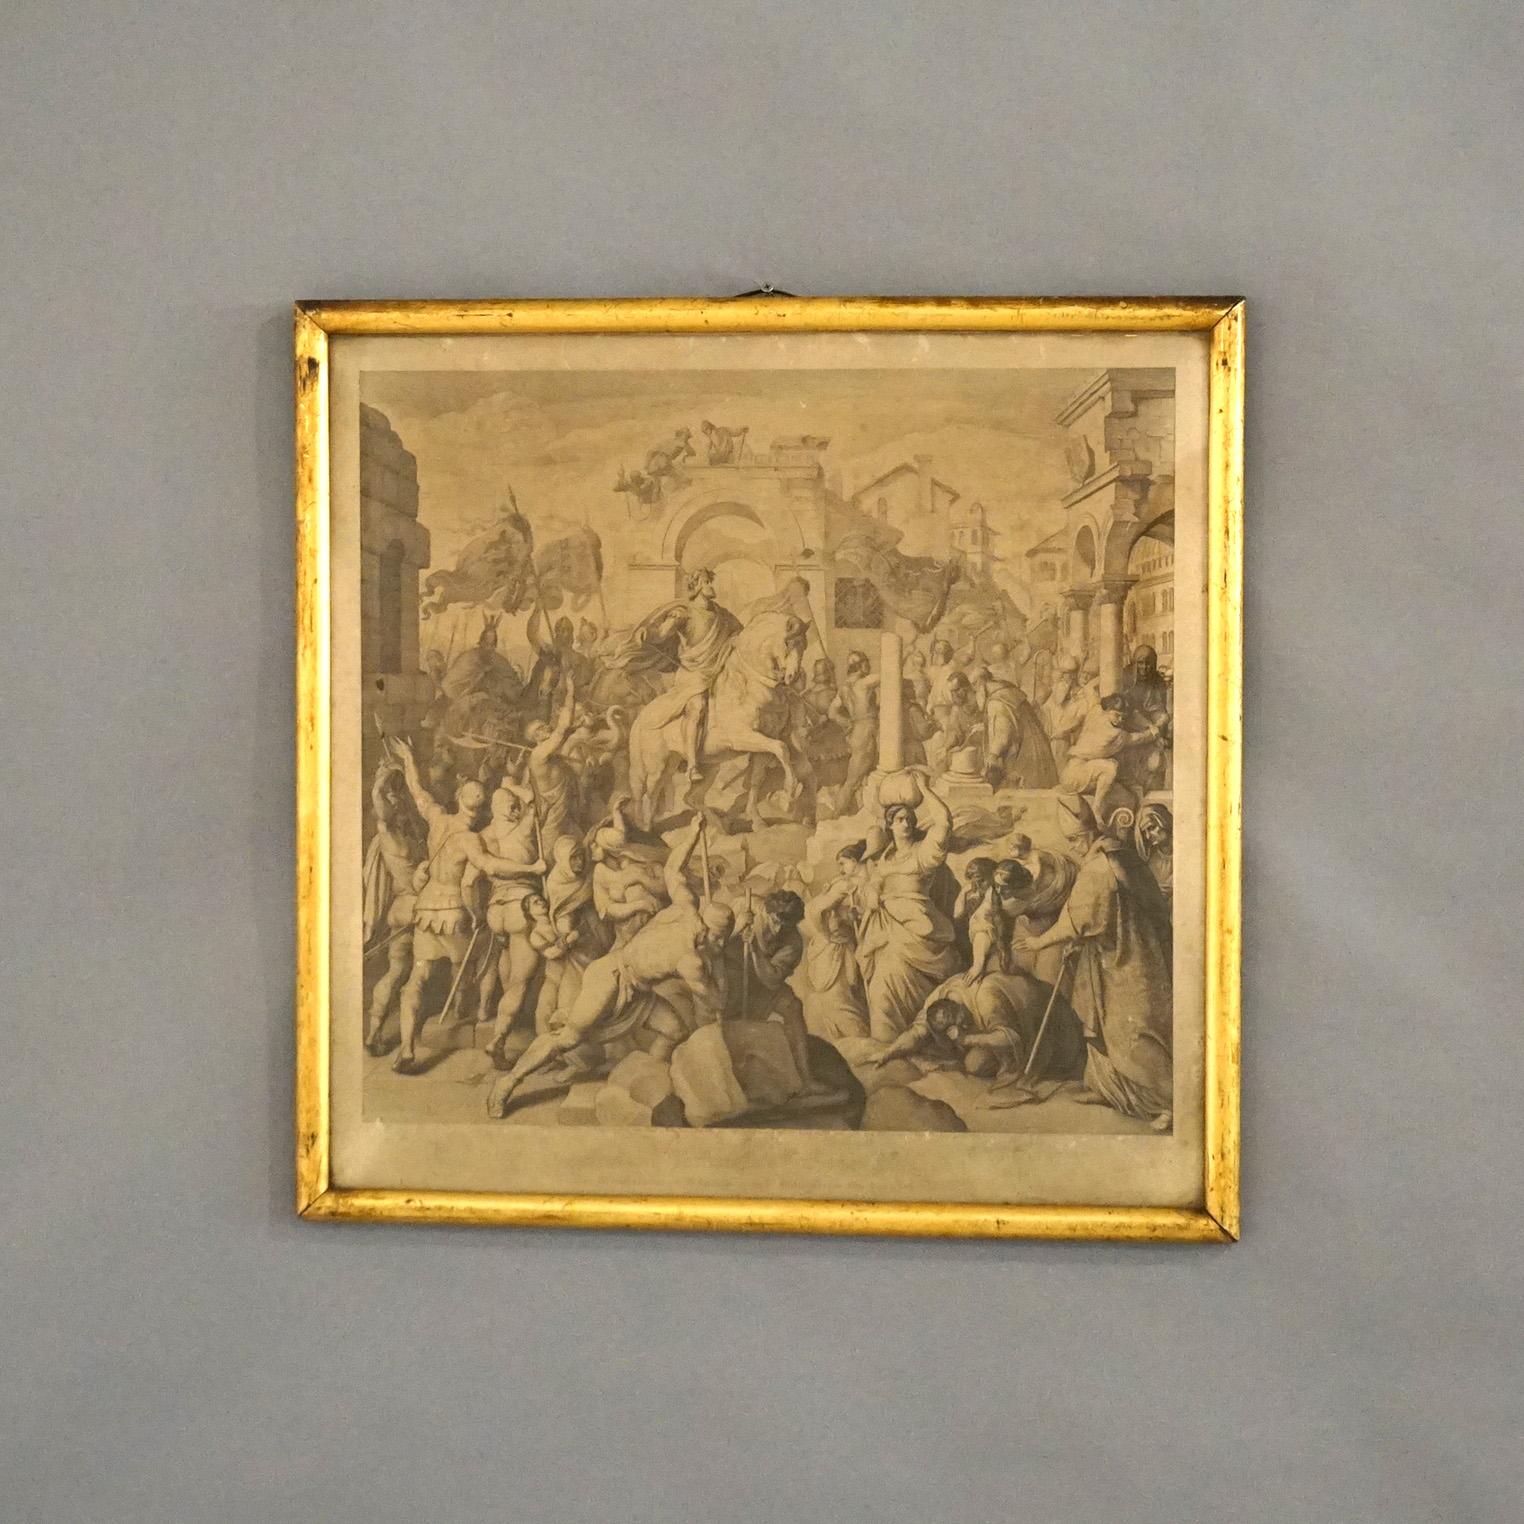 Antique Early Engraving of Classical Scene with Figures Seated in Giltwood Frame, Dated 1842

Measures - 26.75